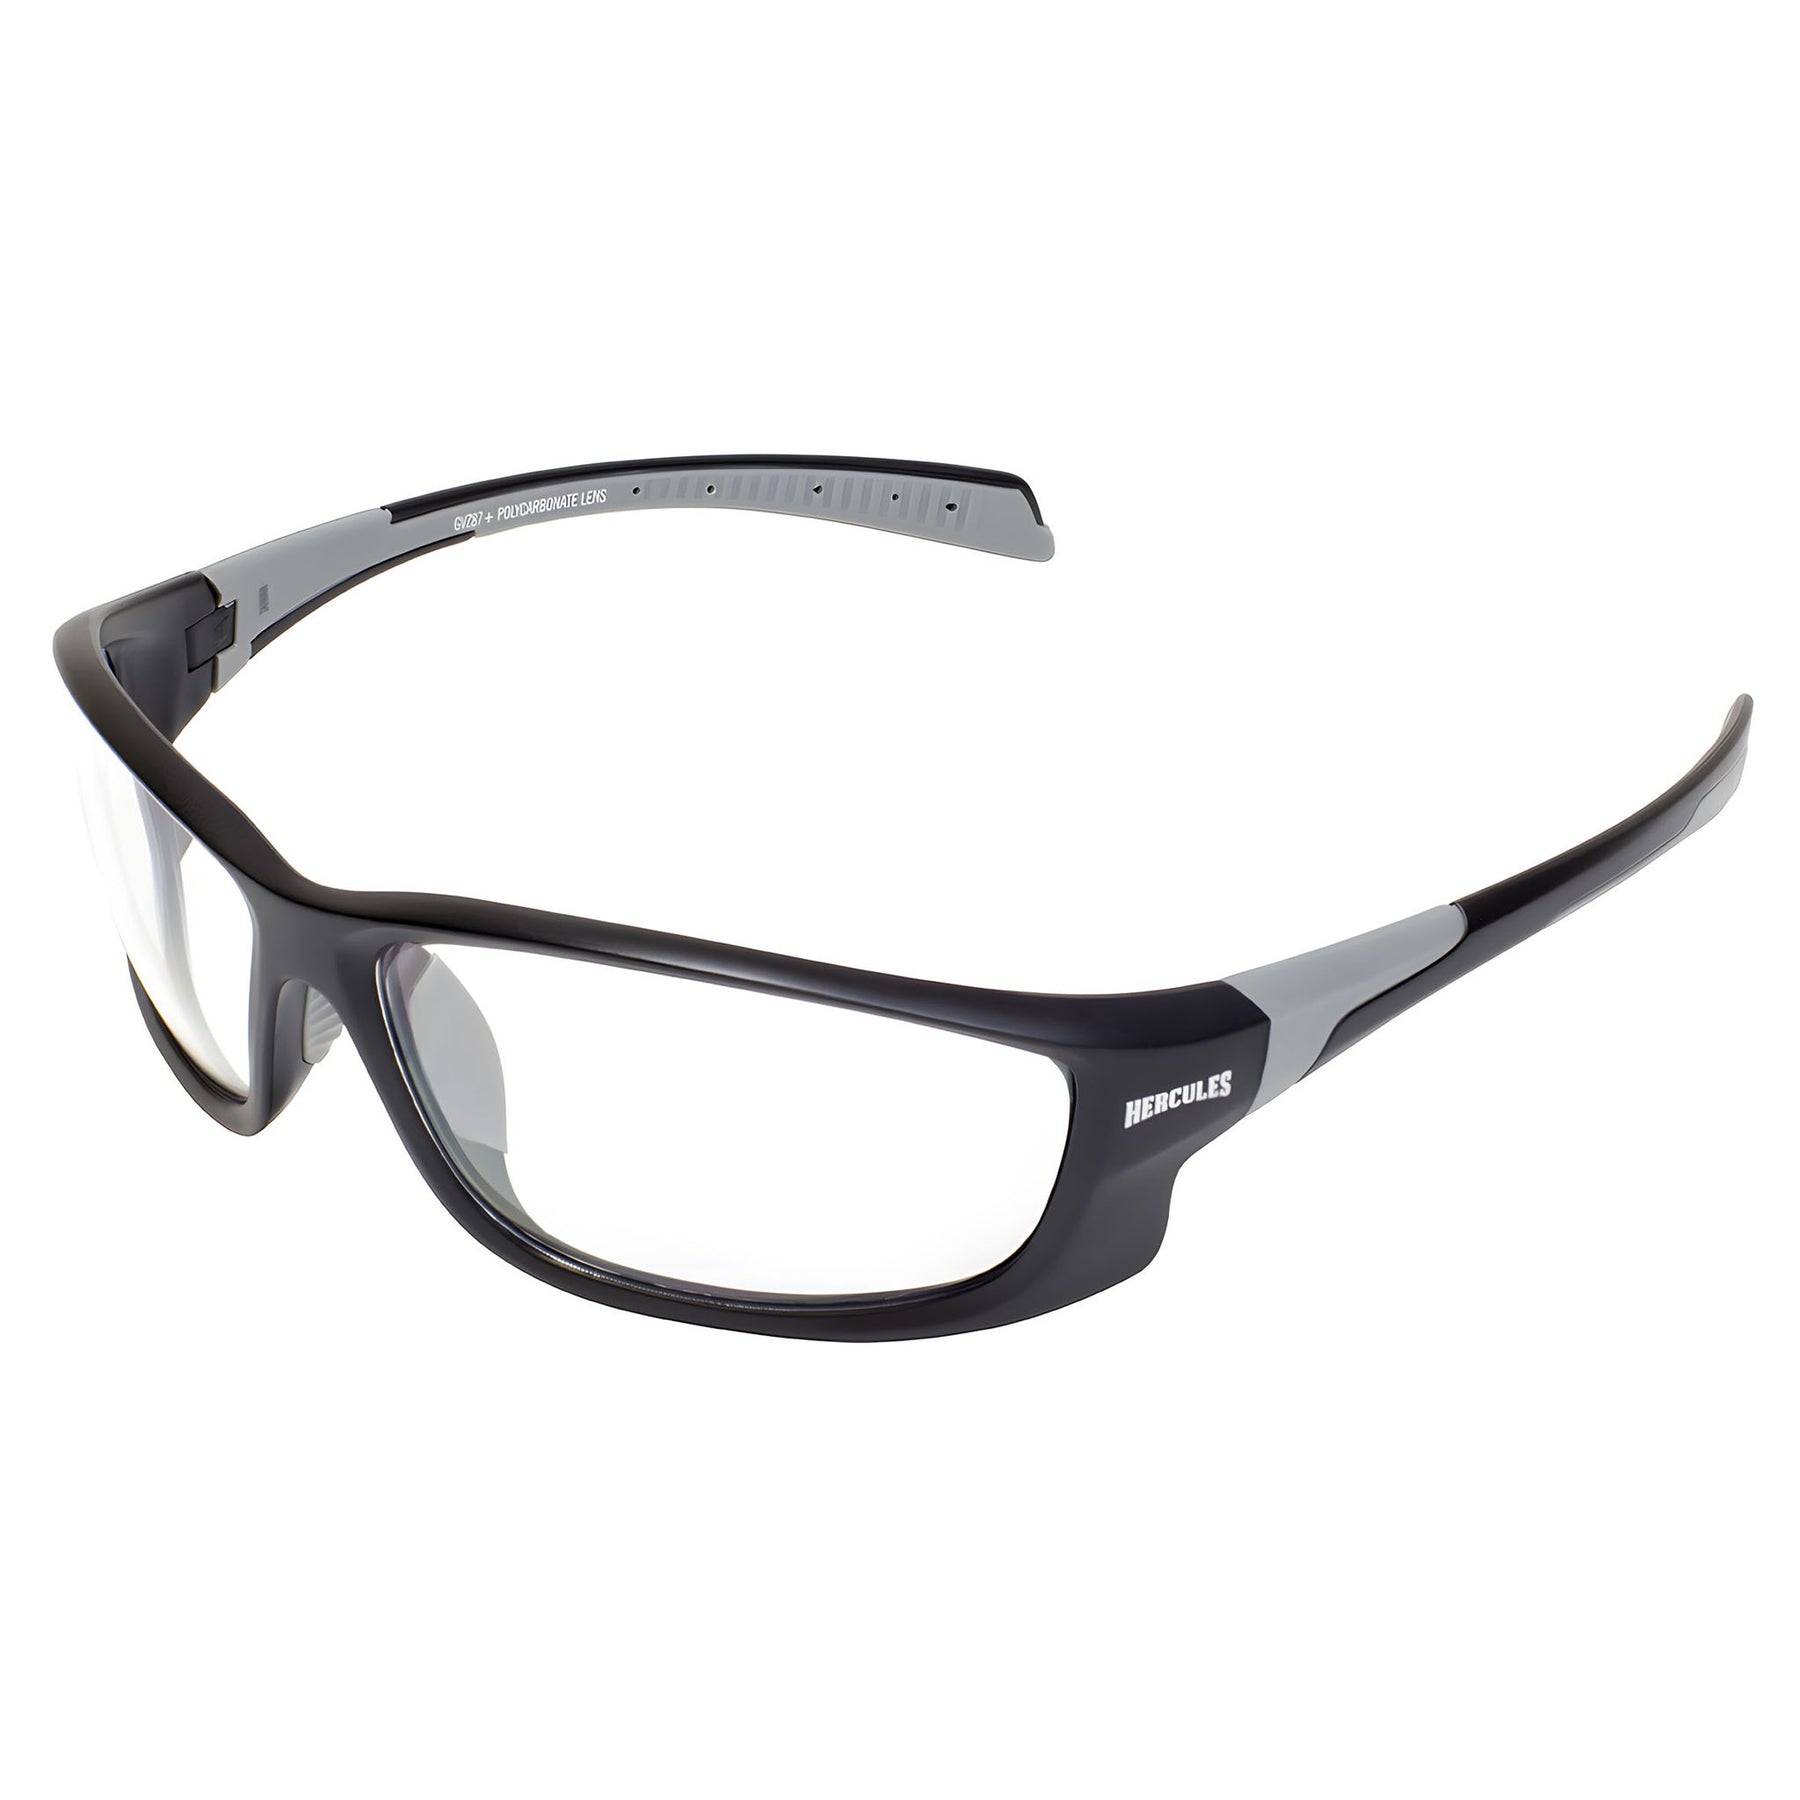 Hercules 5 Safety Glasses